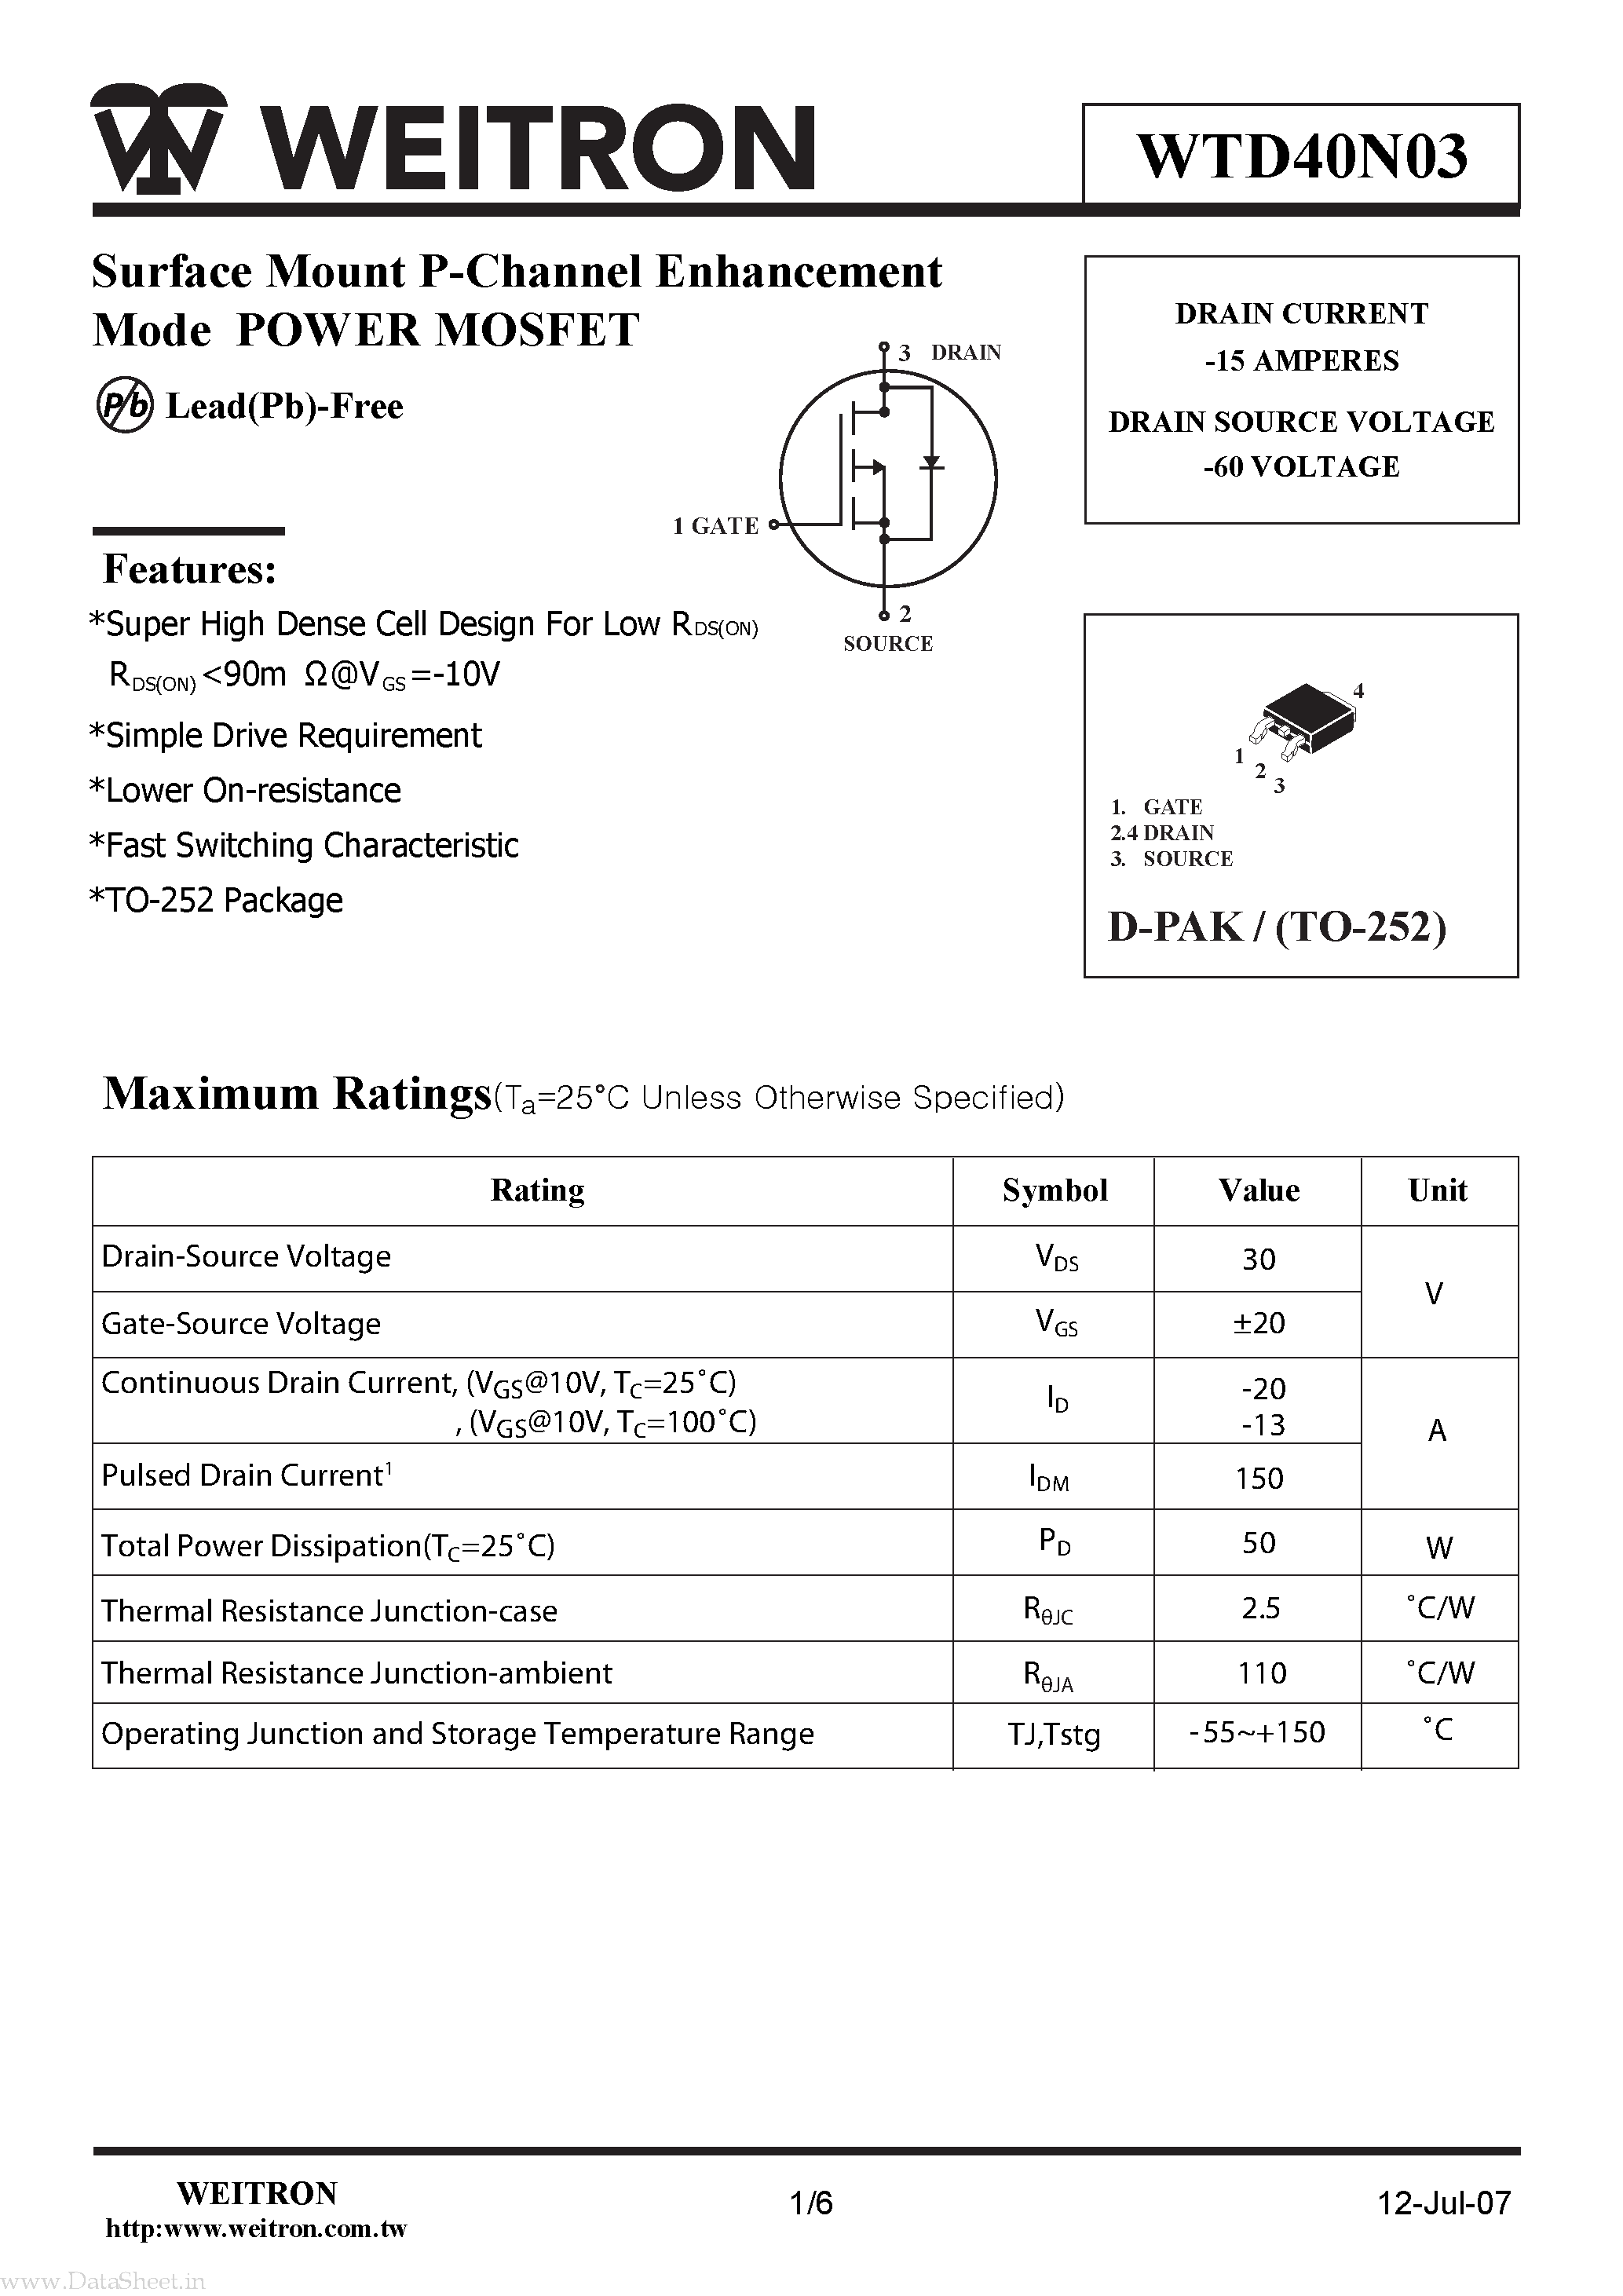 Datasheet WTD40N03 - Surface Mount P-Channel Enhancement Mode POWER MOSFET page 1